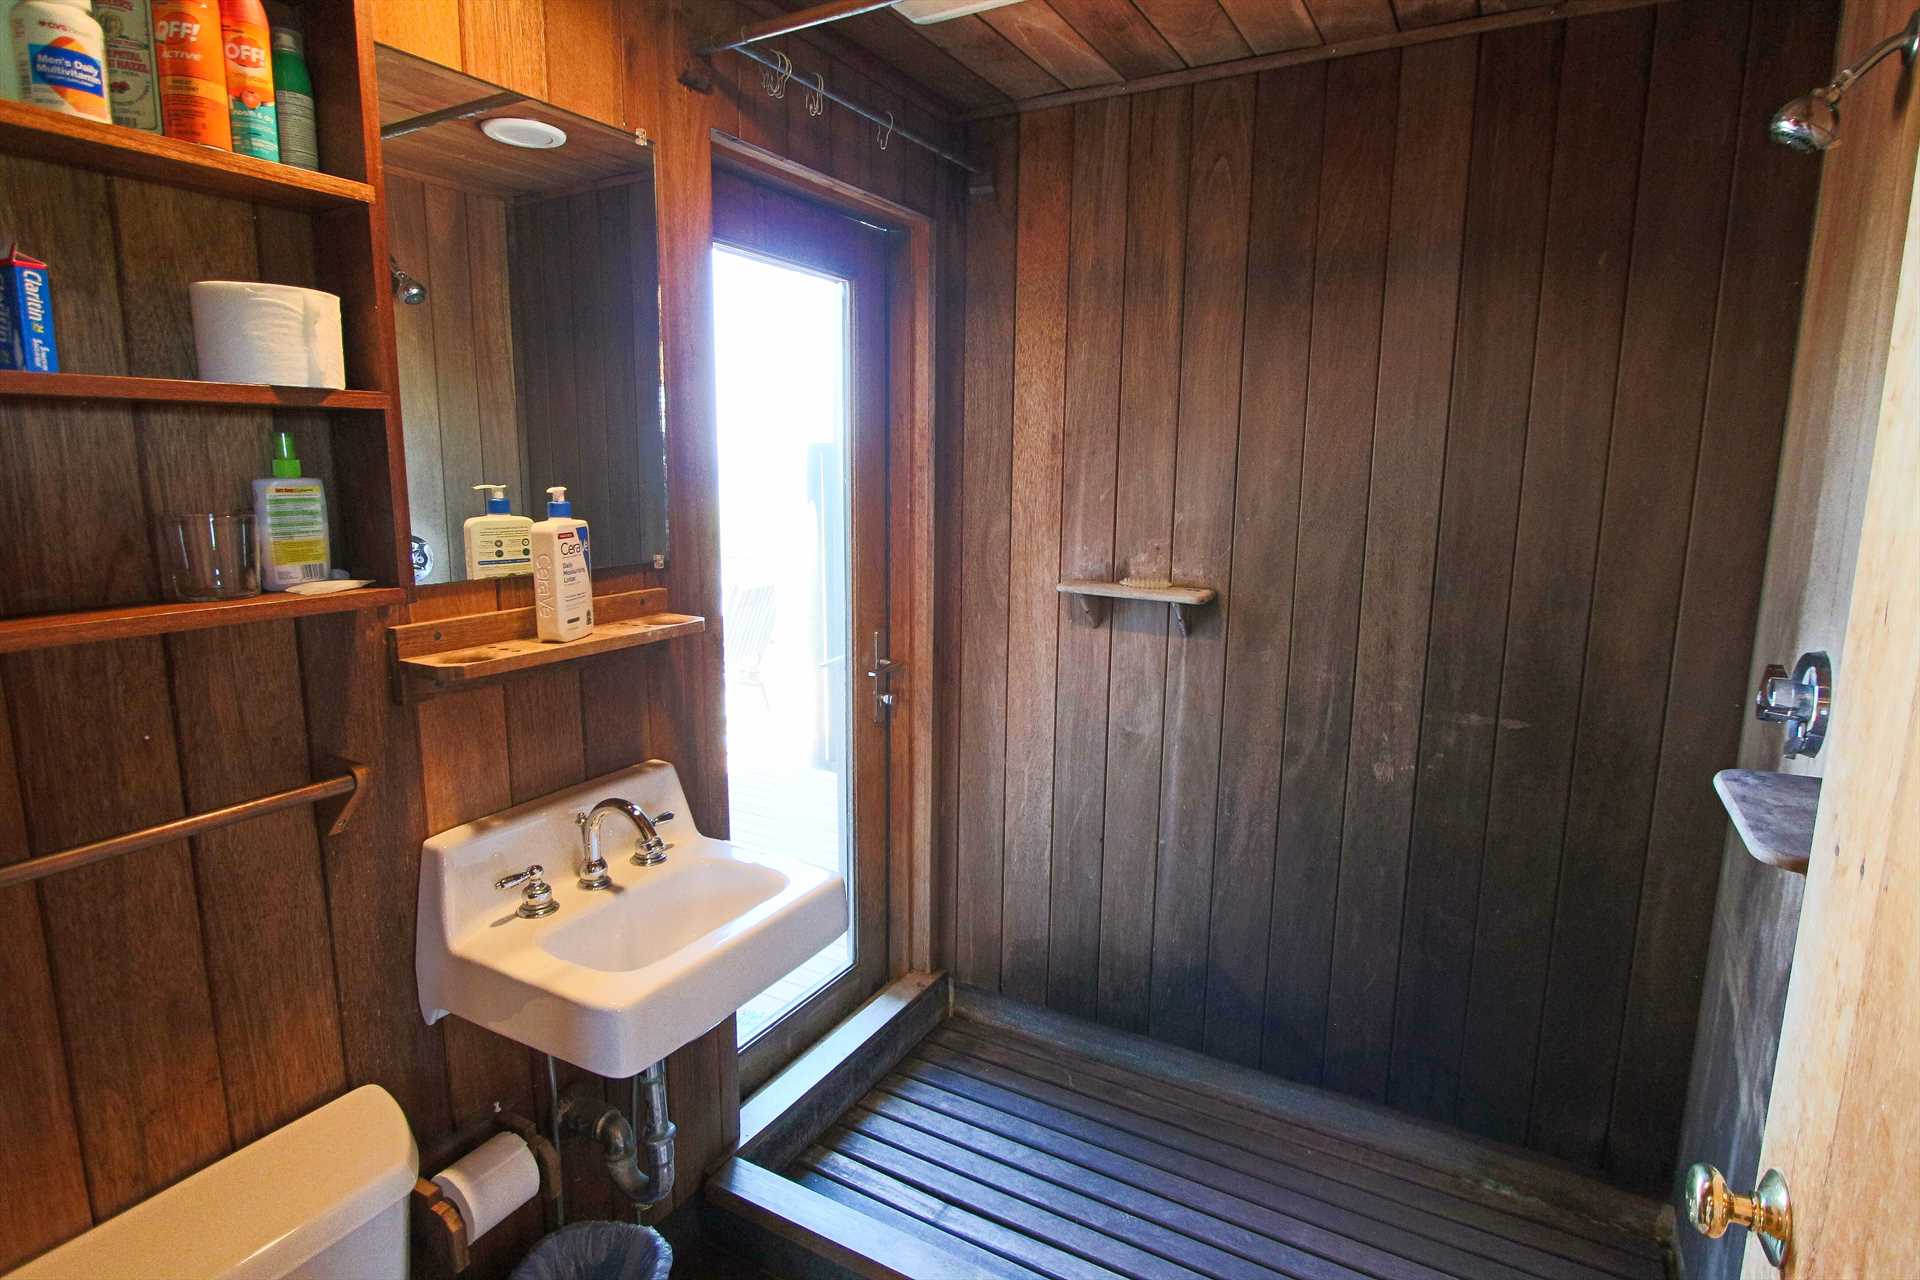 Bathroom with Shower. Door in Bathroom Leads out to deck are